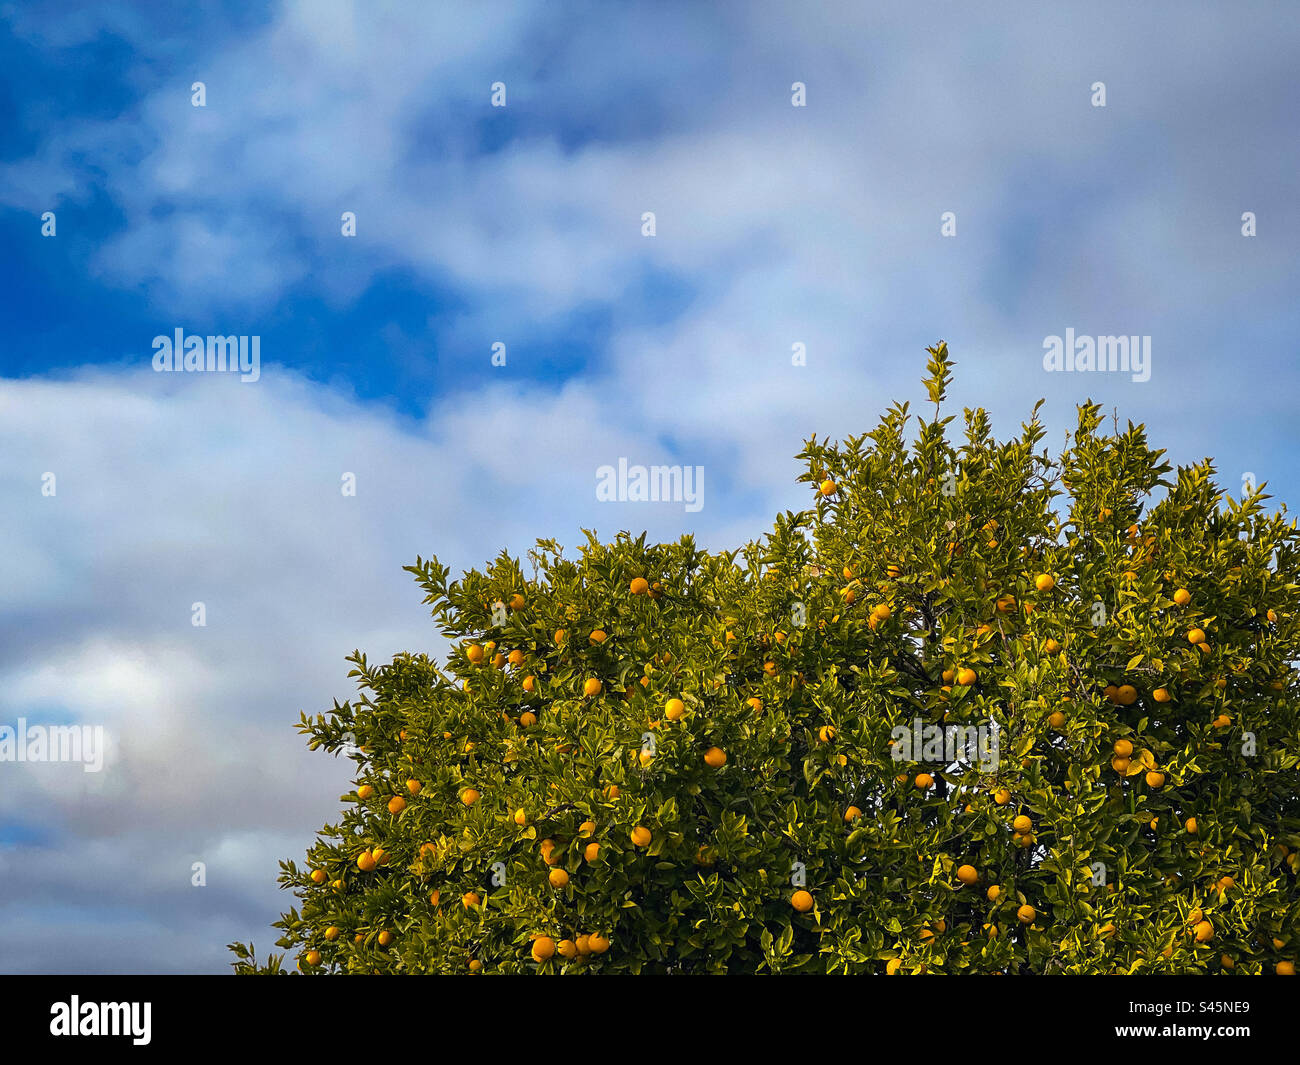 Low angle view of citrus fruit tree, Citrus x aurantium aka bitter orange on a sunny winter’s day against cloudy blue sky. Stock Photo